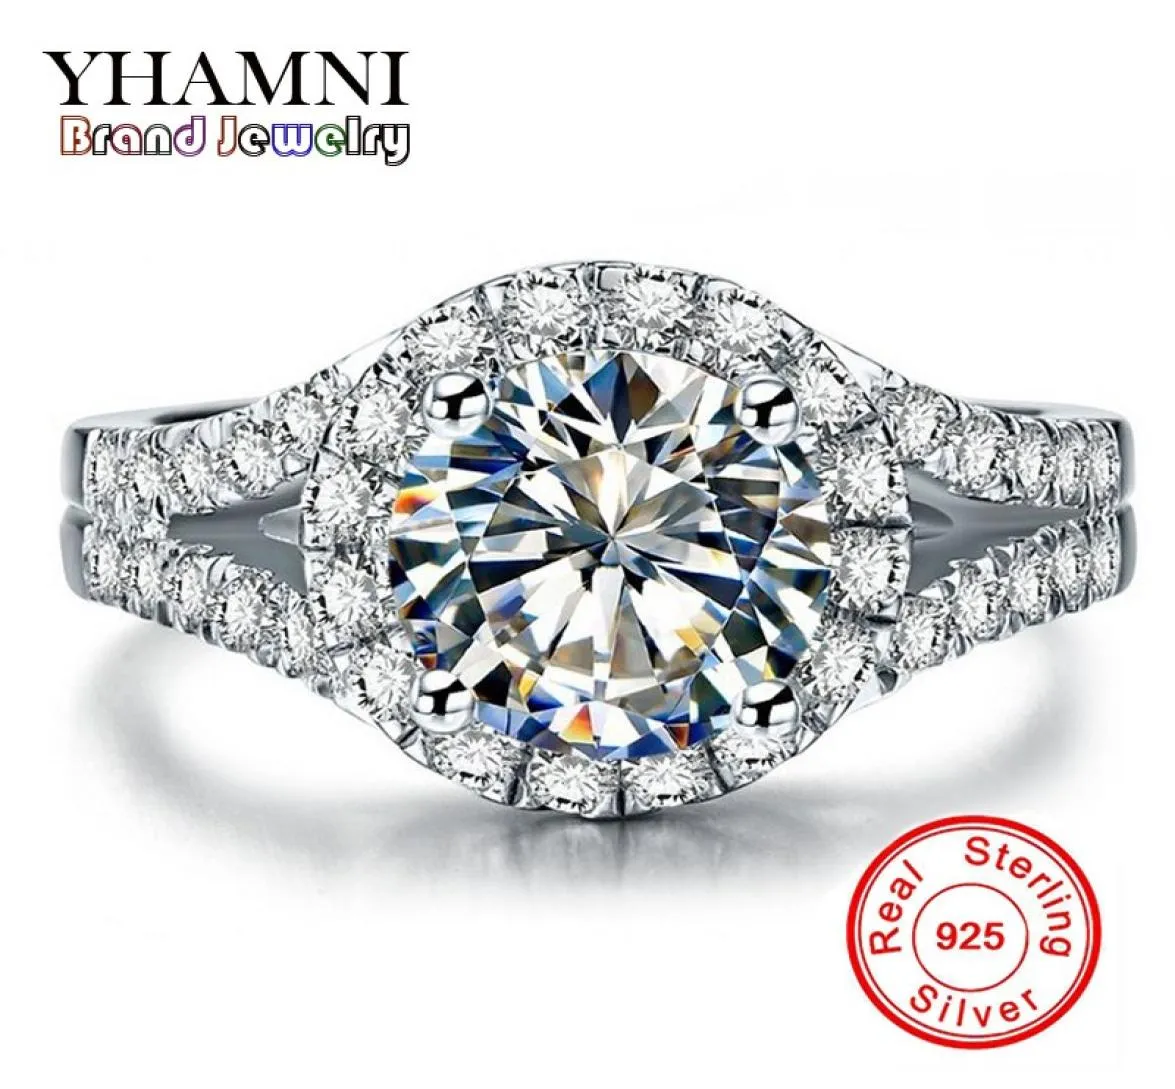 YHAMNI Real Solid 925 Silver Wedding Rings Jewelry for Women 2 Carat Sona CZ Diamond Engagement Rings Accessories XMJ5102733520